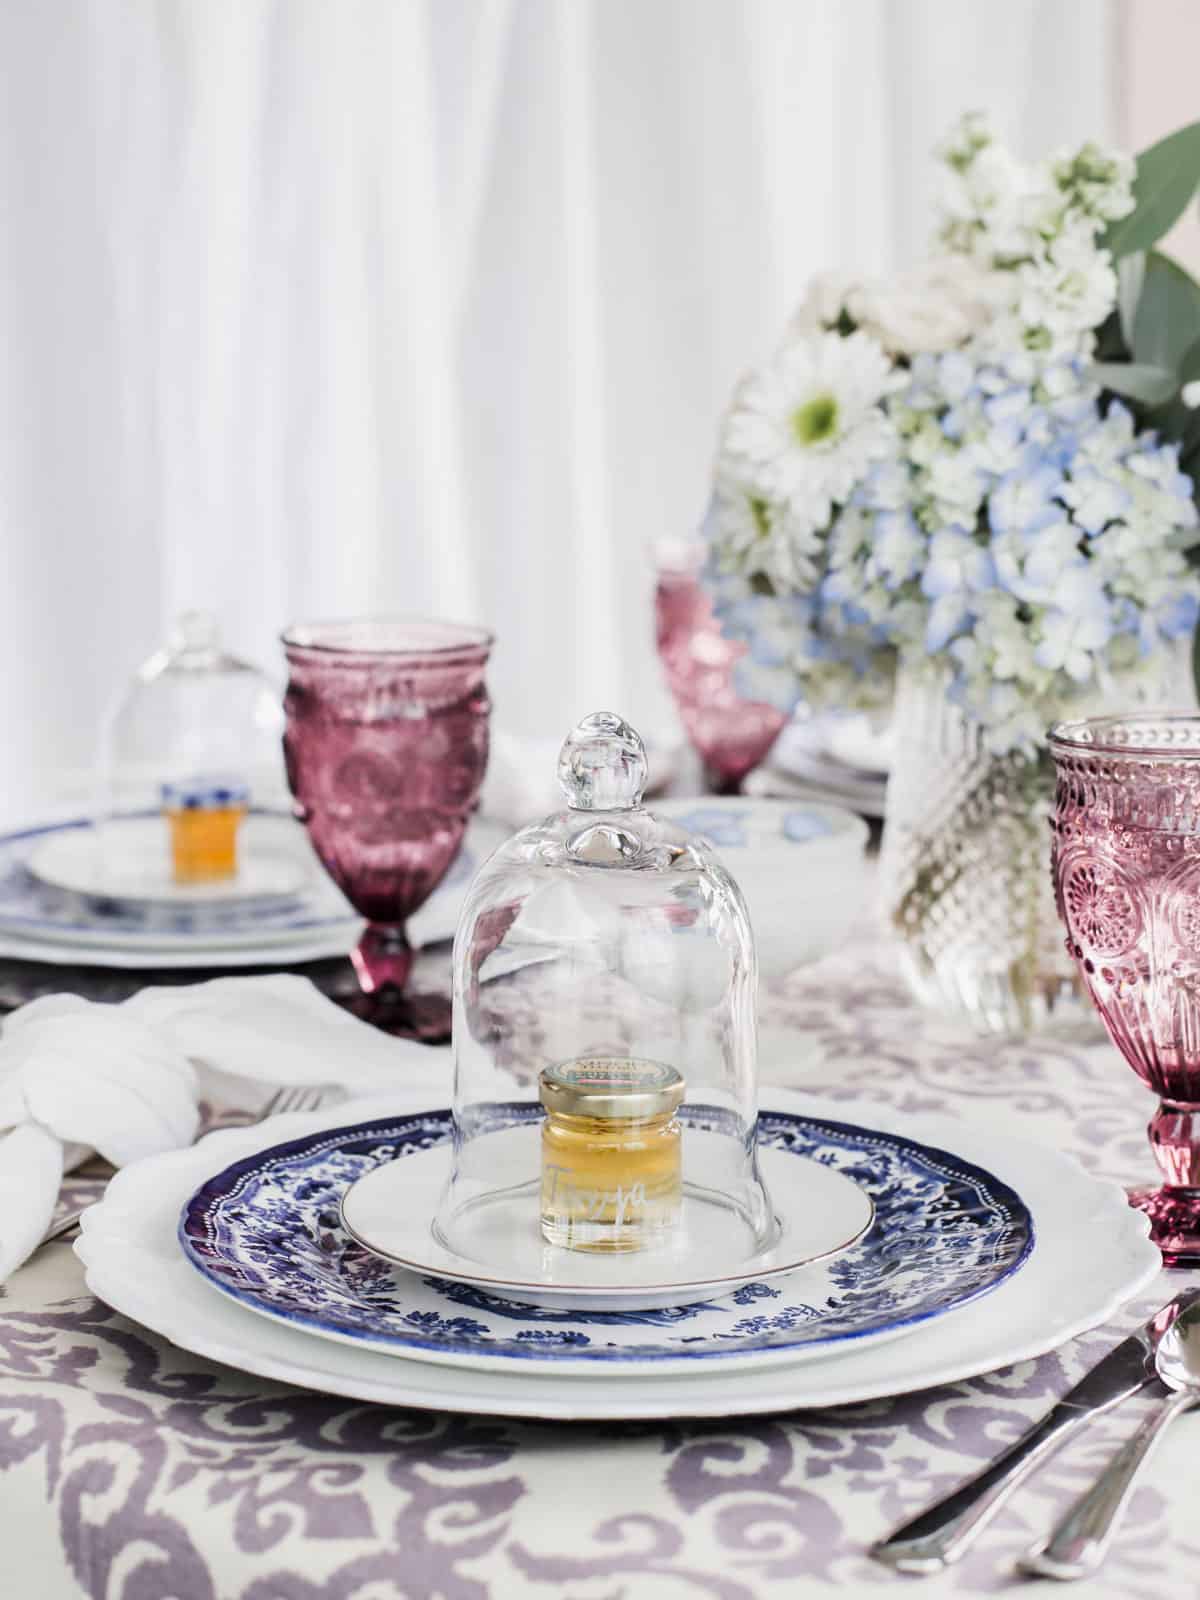 dining table set for ladies luncheon with blue and white place settings.